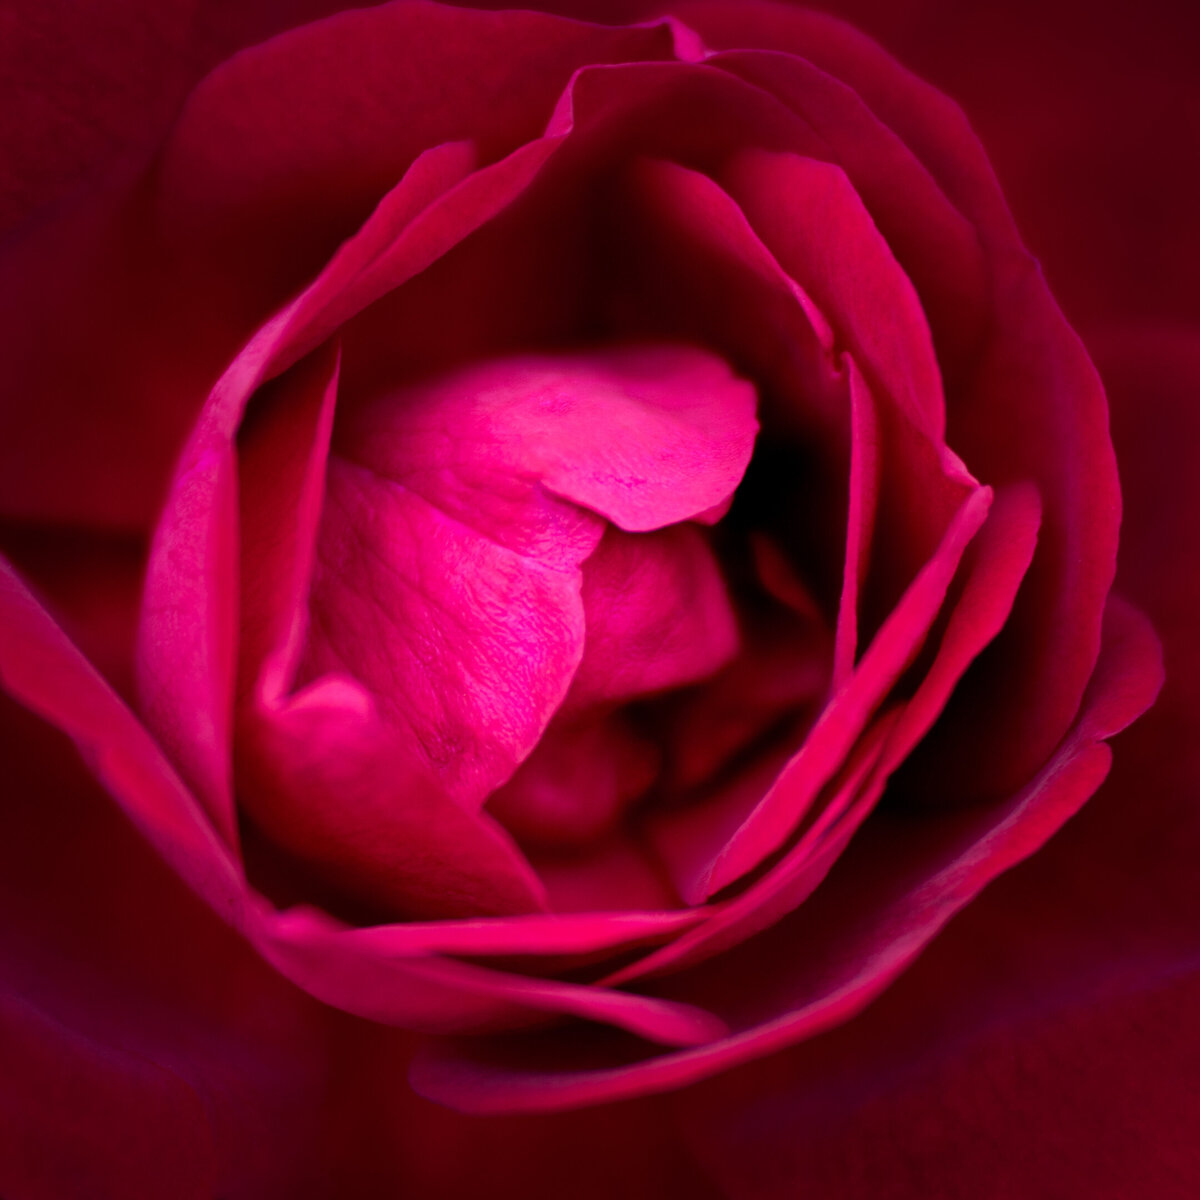 Macro photo of a red rose.